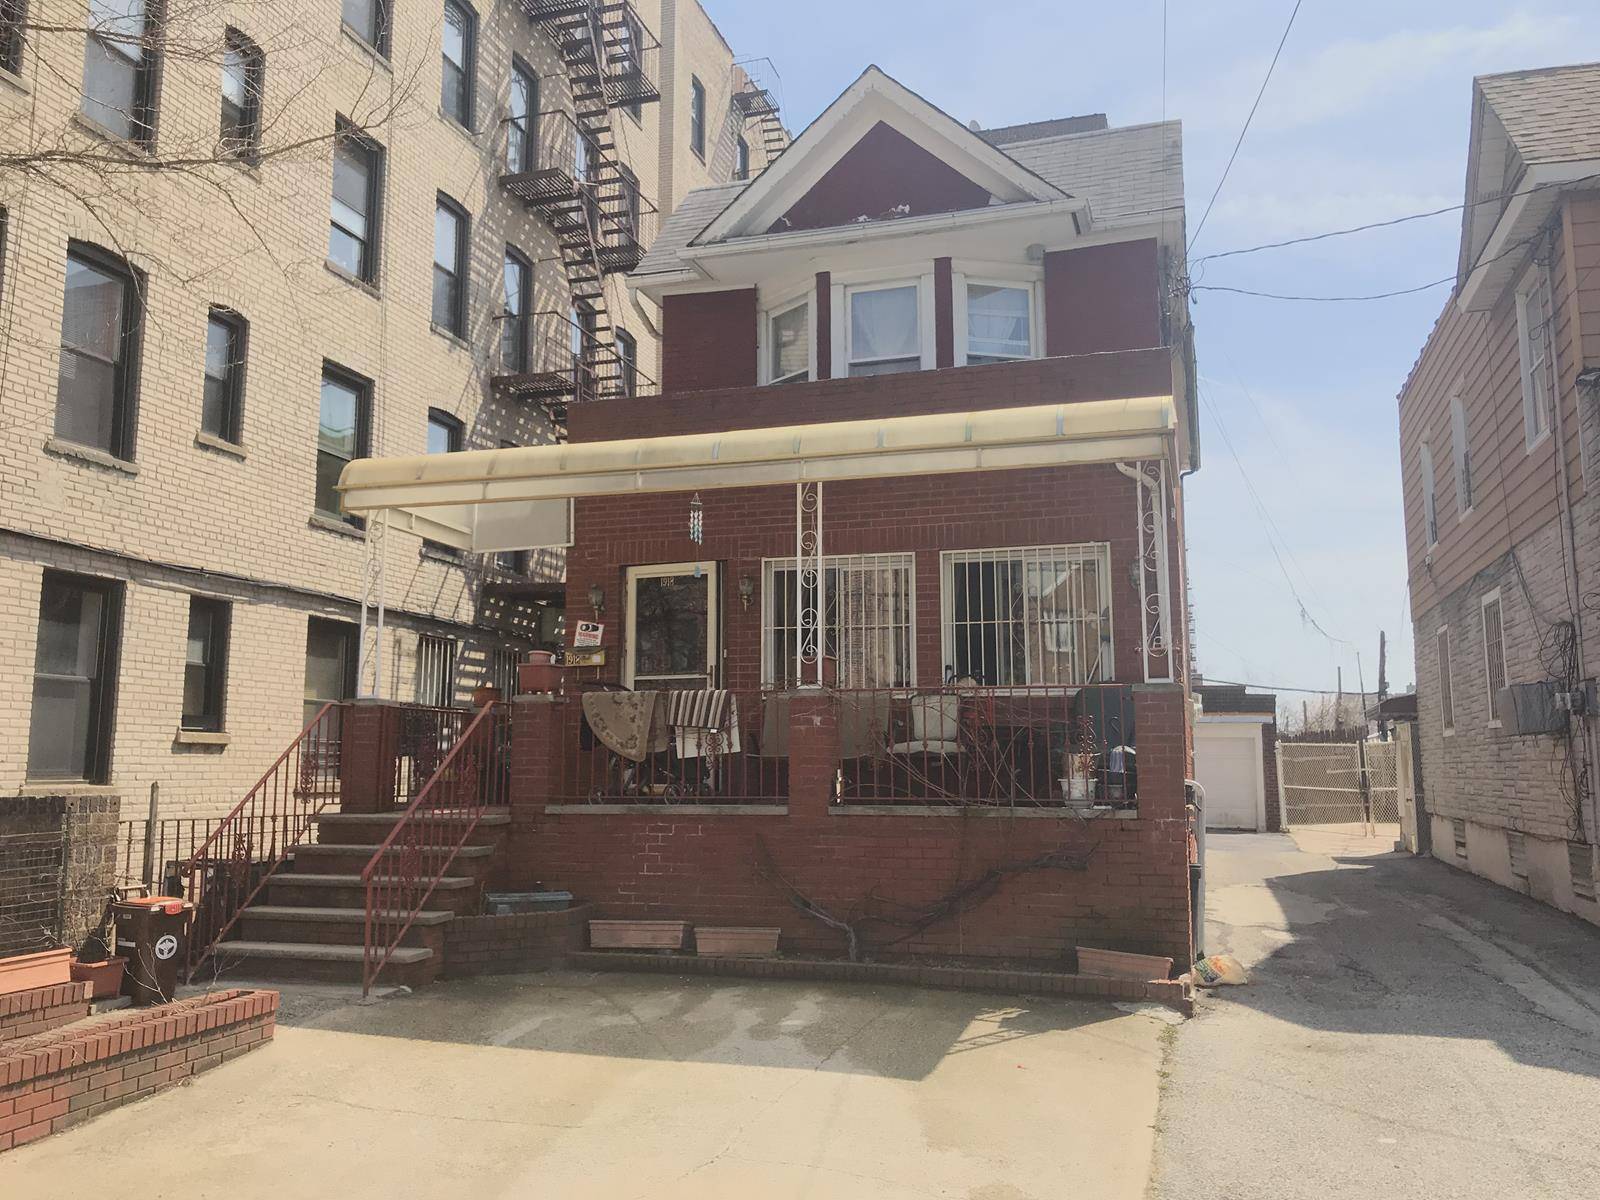 This Single Family DETACHED BRICK Home has just hit the Sheepshead Bay market !